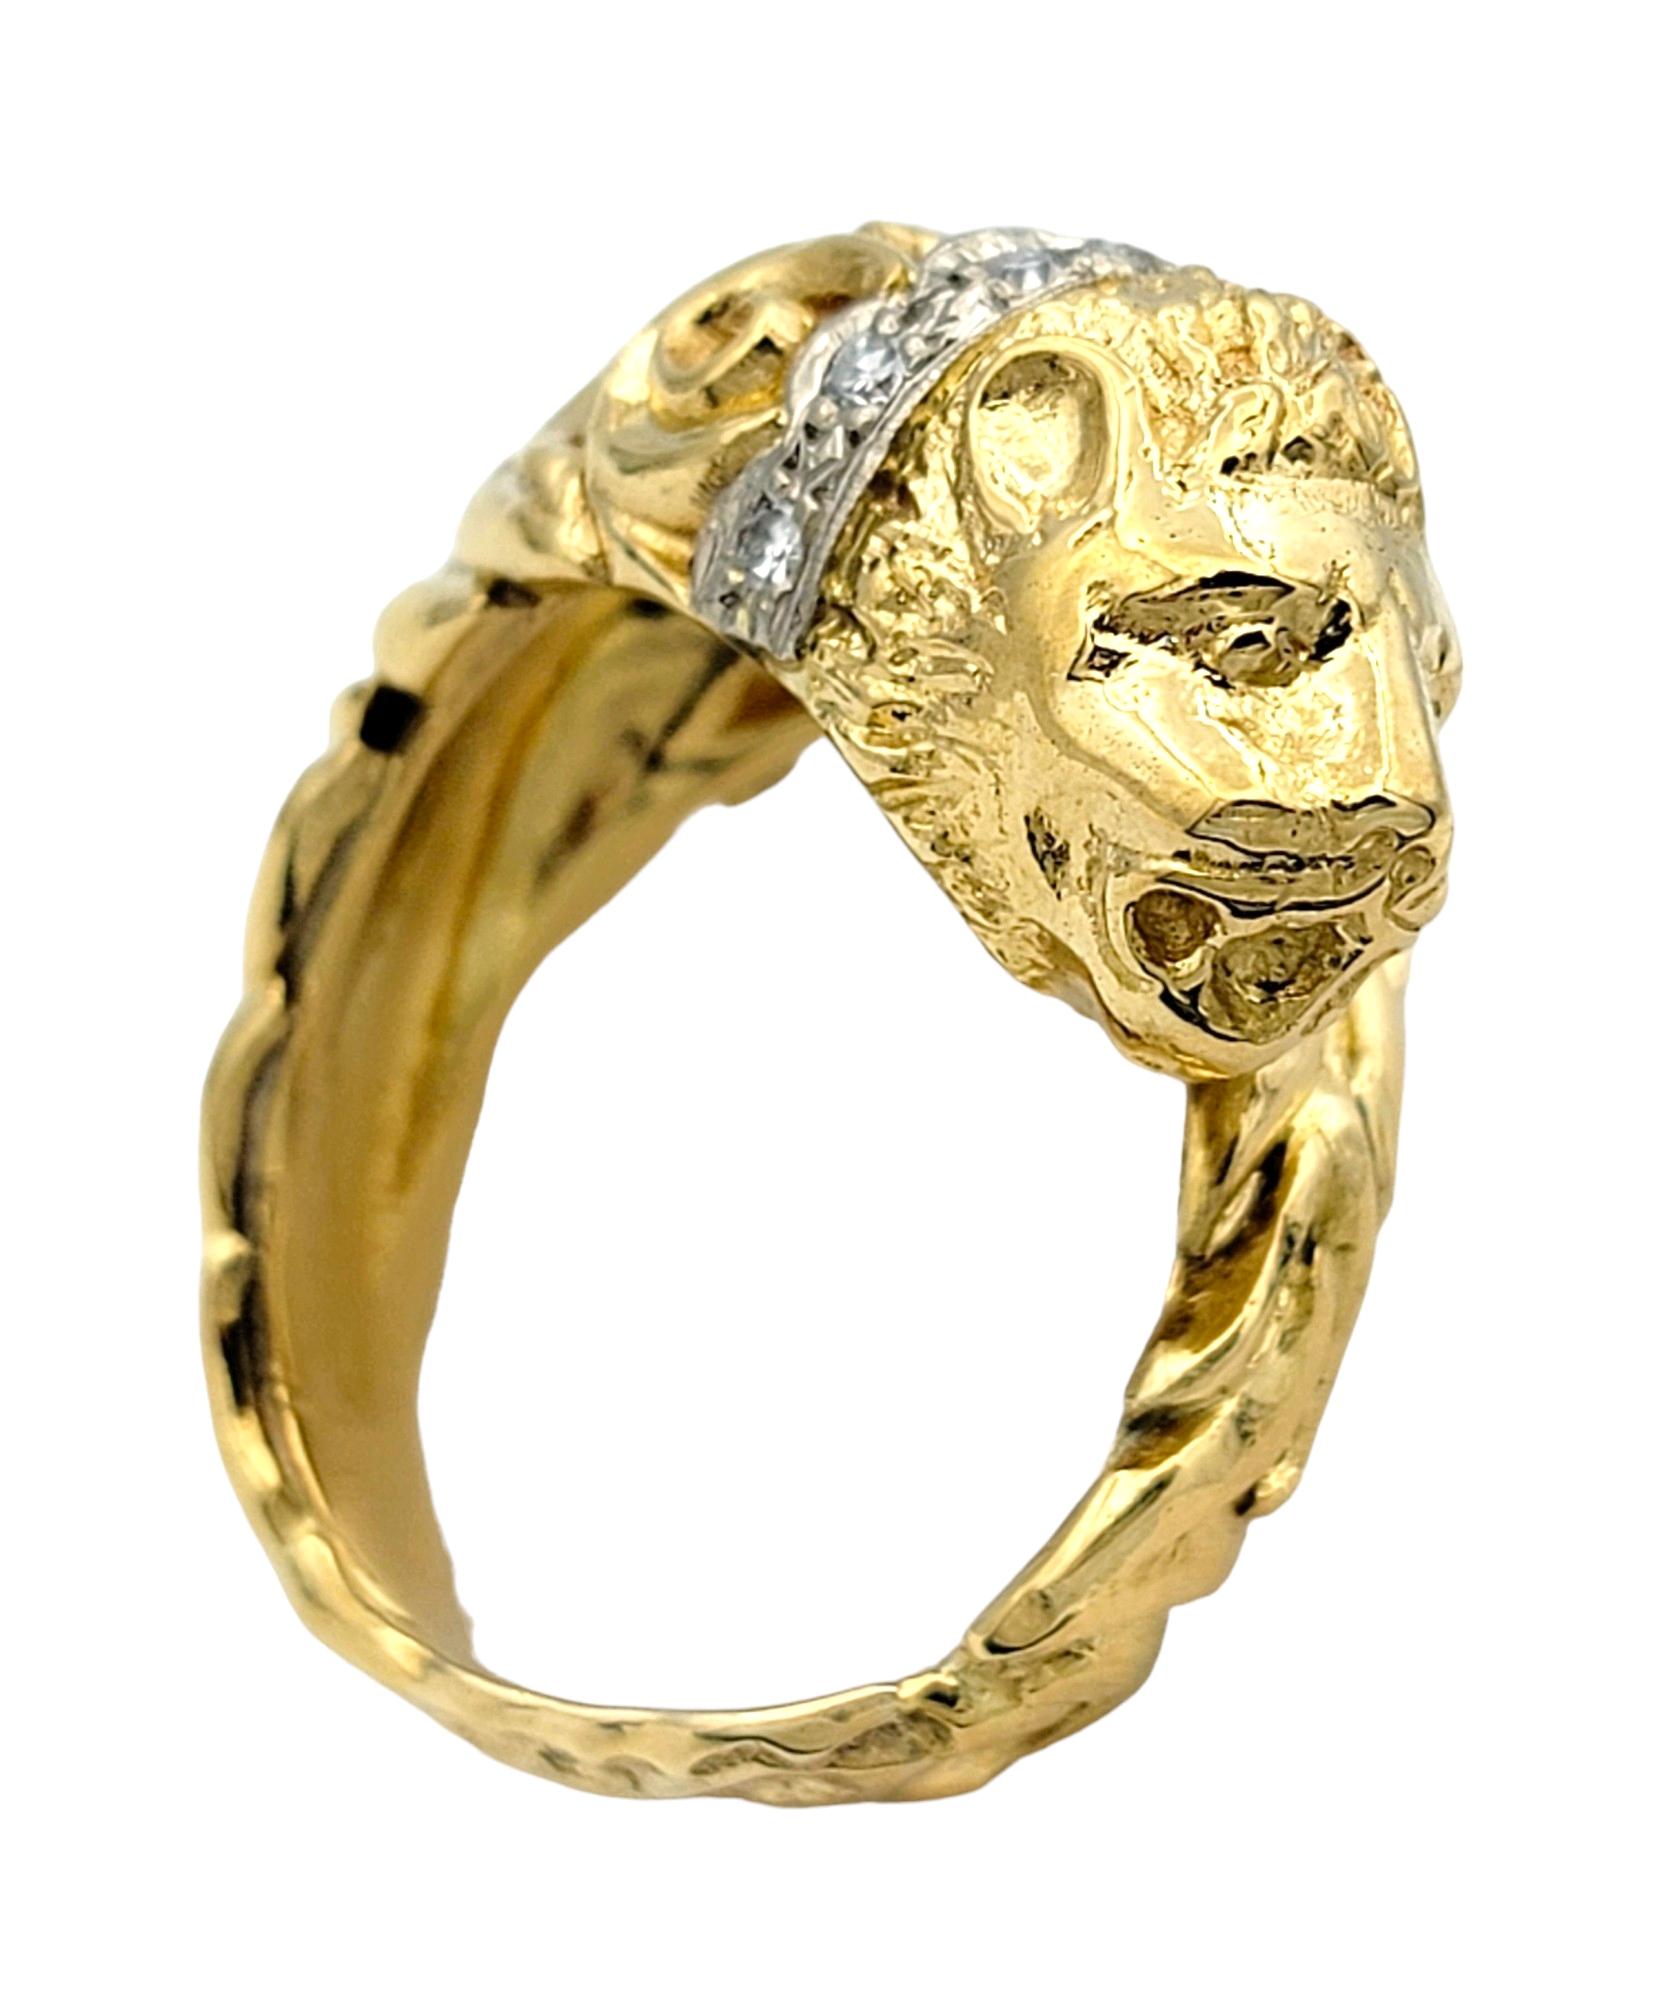 Ring Size: 6.75

Exuding regal charm and bold elegance, this lion motif bypass ring is a striking piece of jewelry crafted in luxurious 14 karat gold. At its forefront is a majestic lion head, intricately detailed and crafted with exquisite